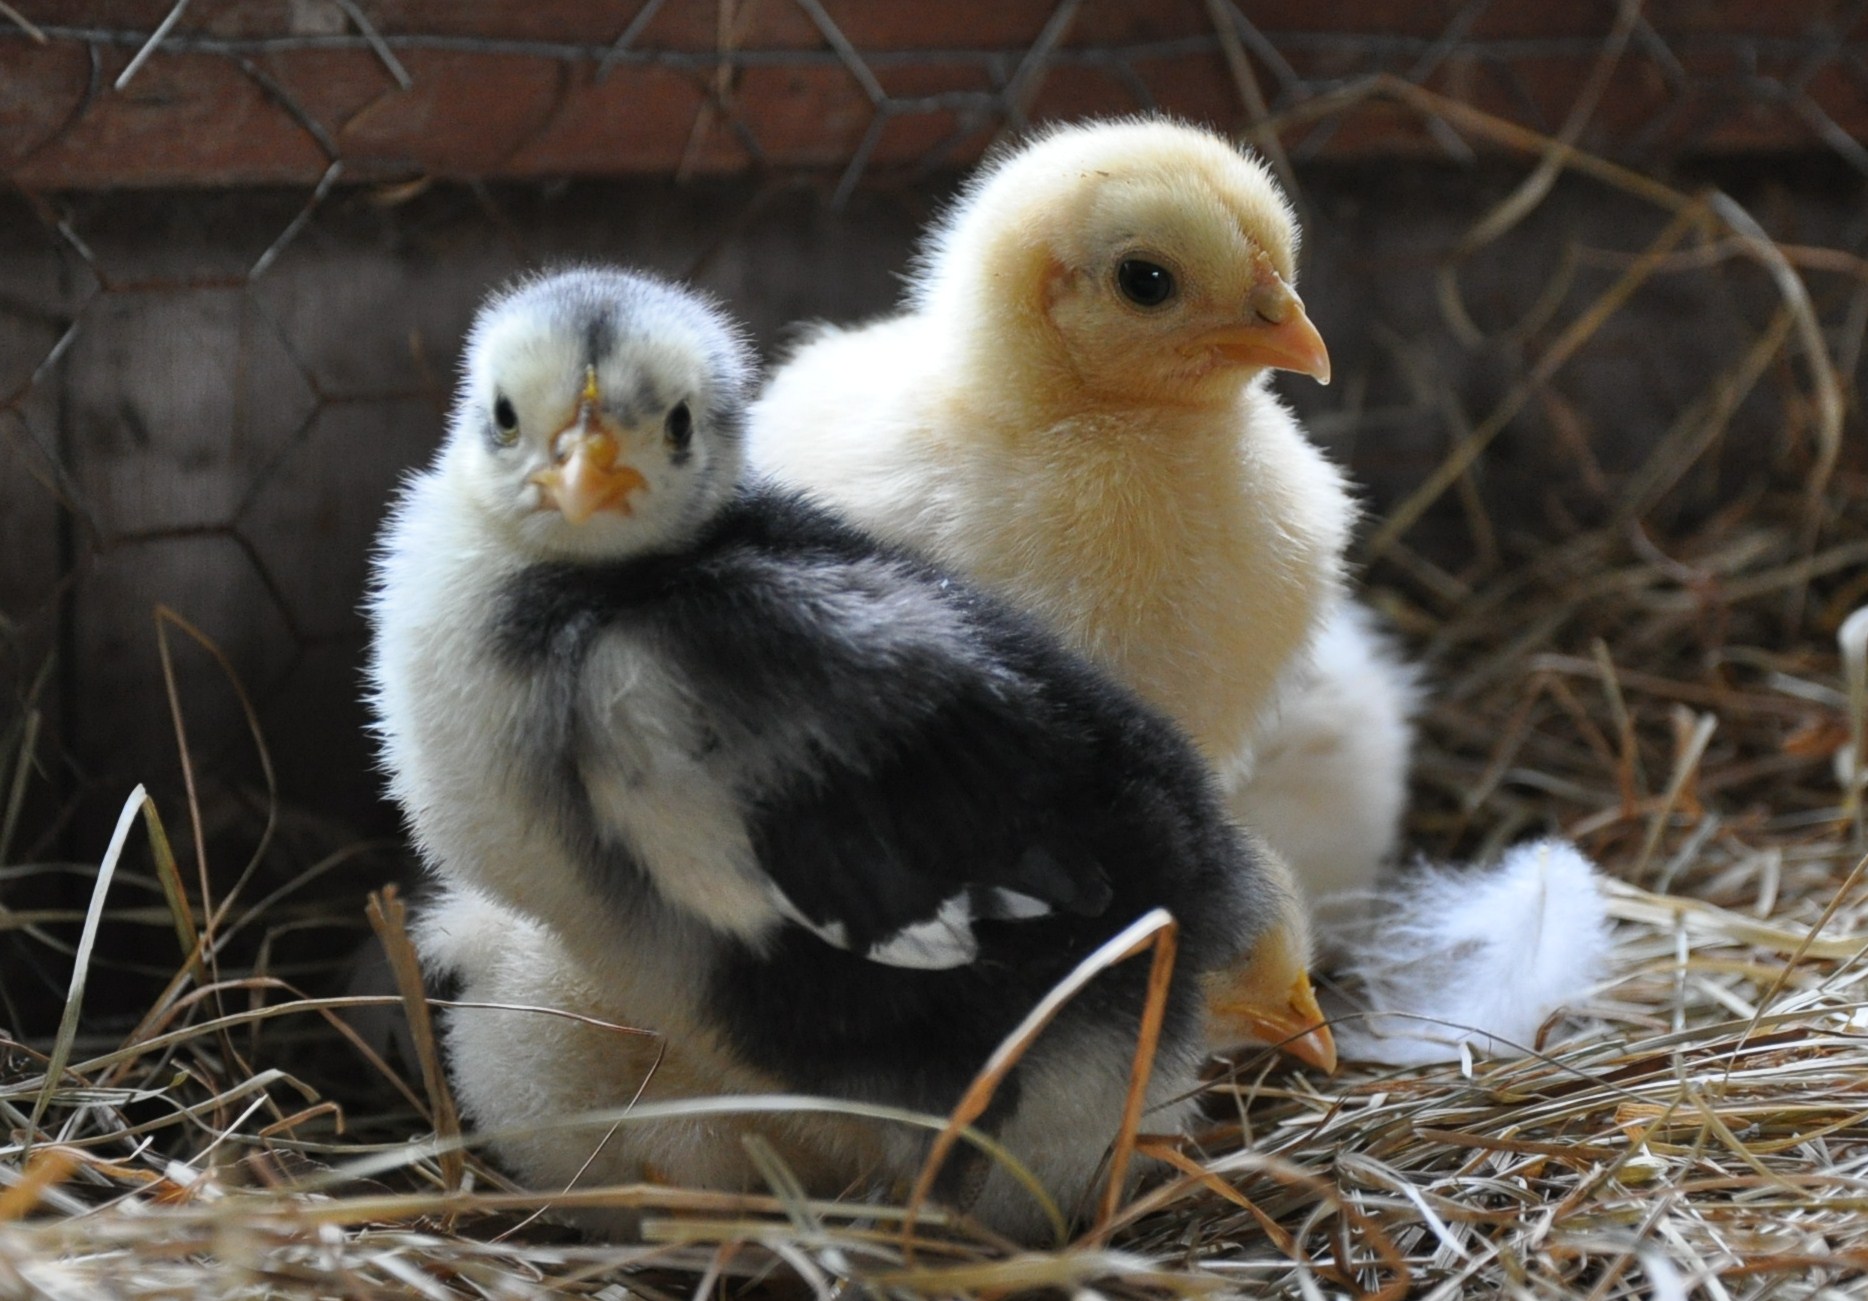 Sibling Chicks (user submitted)